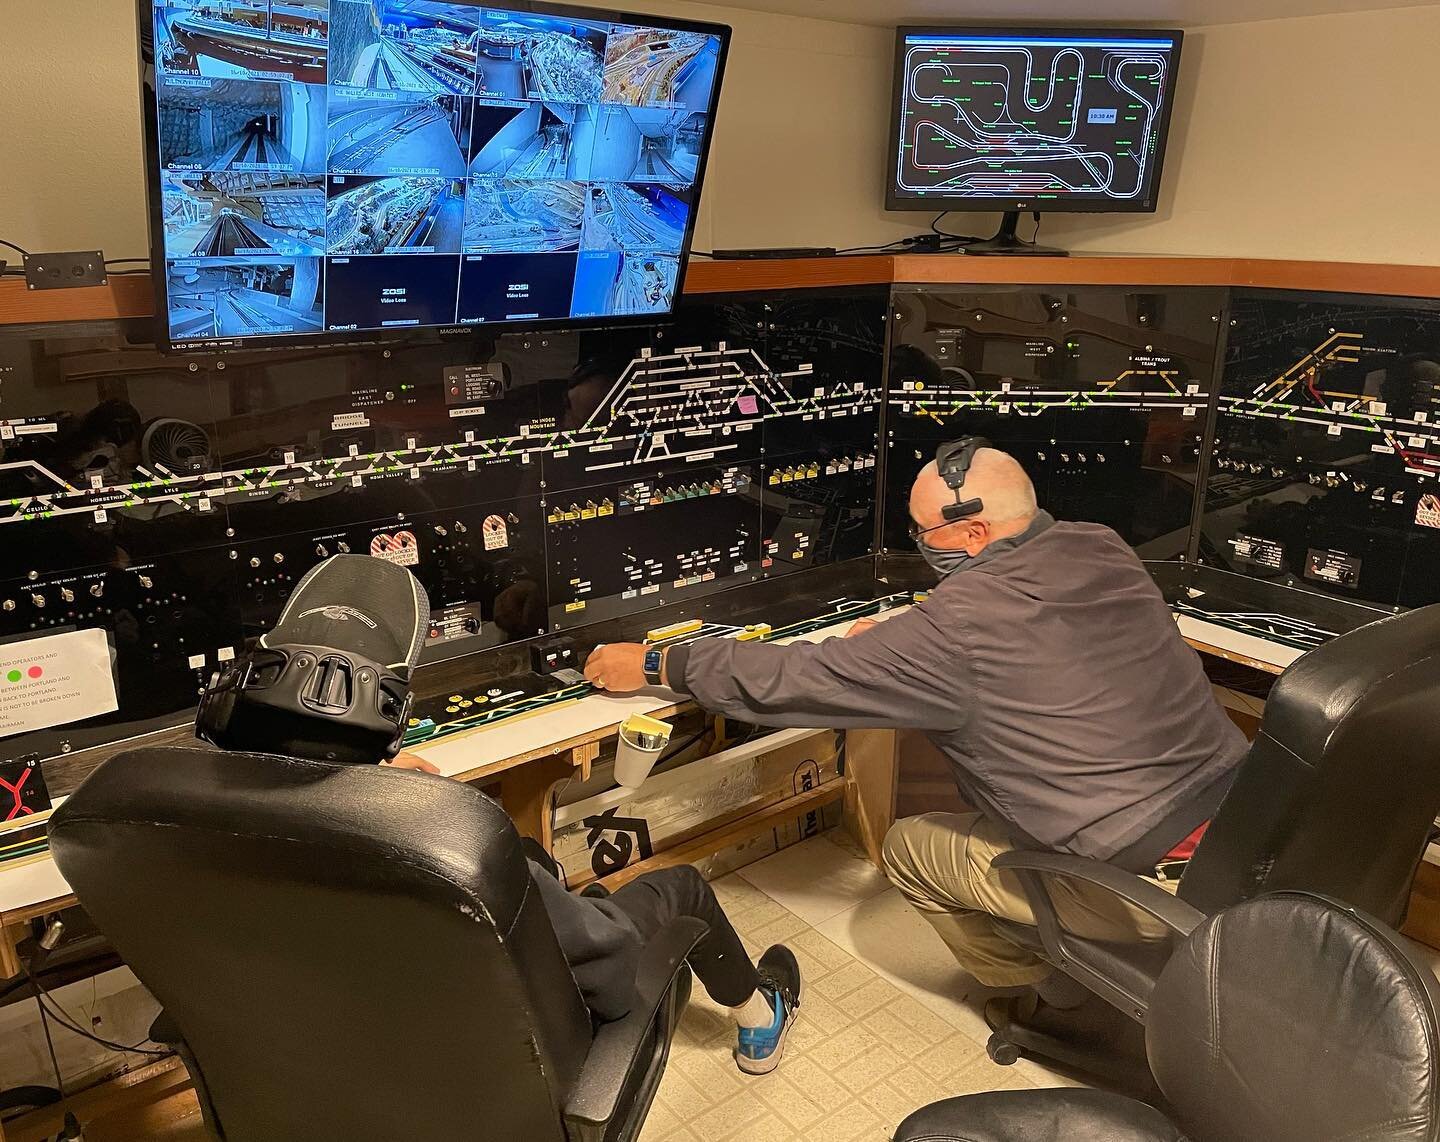 The Columbia Gorge Model Railroad is controlled by two separate dispatchers, who utilize a CTC panel for turnout control, and determine the location of trains using detection (top right) and a network of live streaming cameras (top left). Train opera